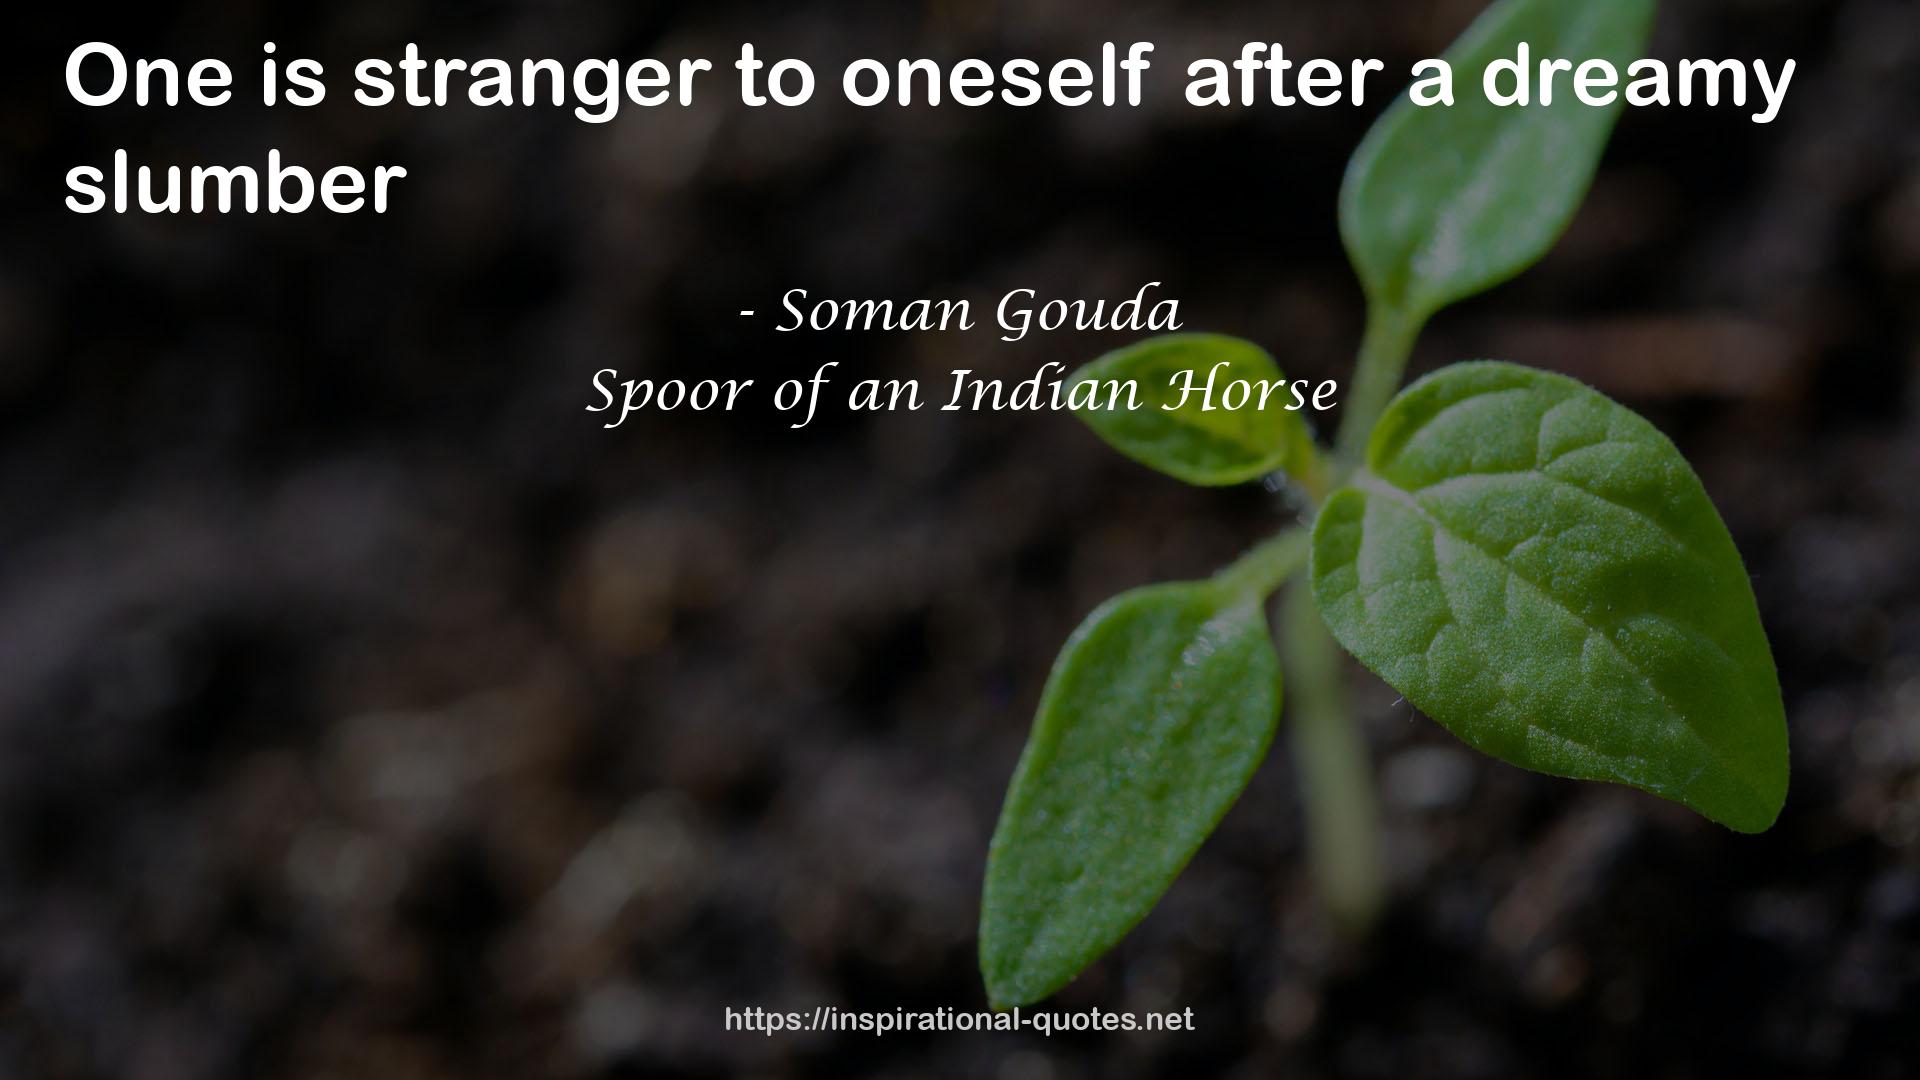 Spoor of an Indian Horse QUOTES